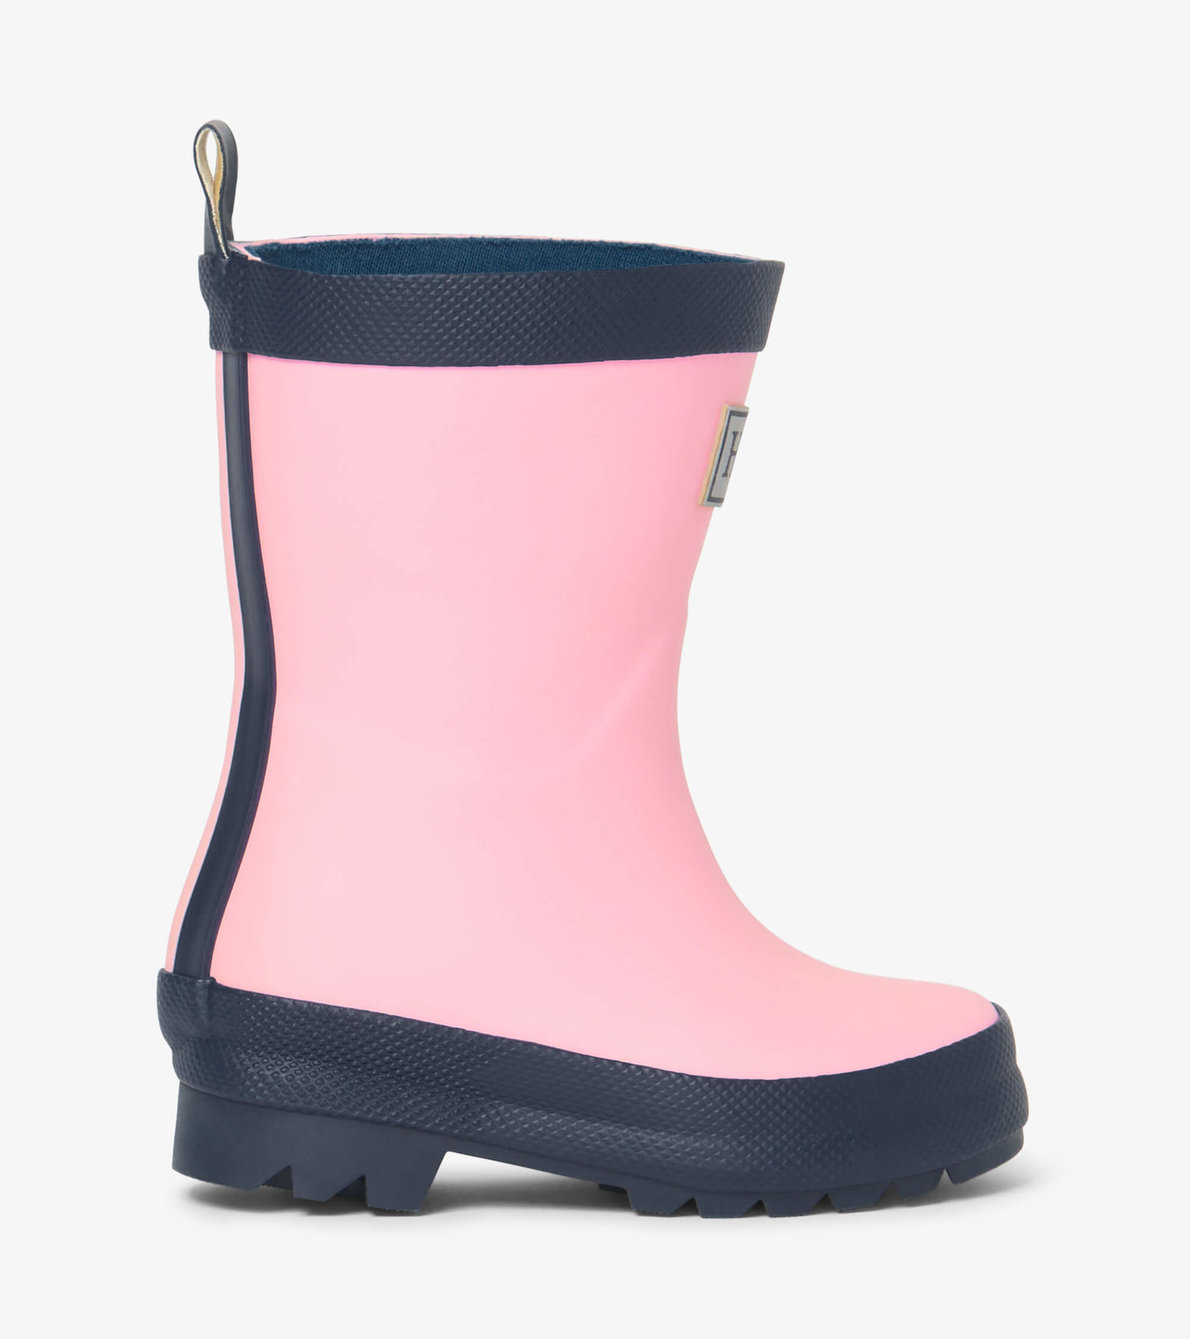 View larger image of My 1st Rain Boots - Pink & Navy